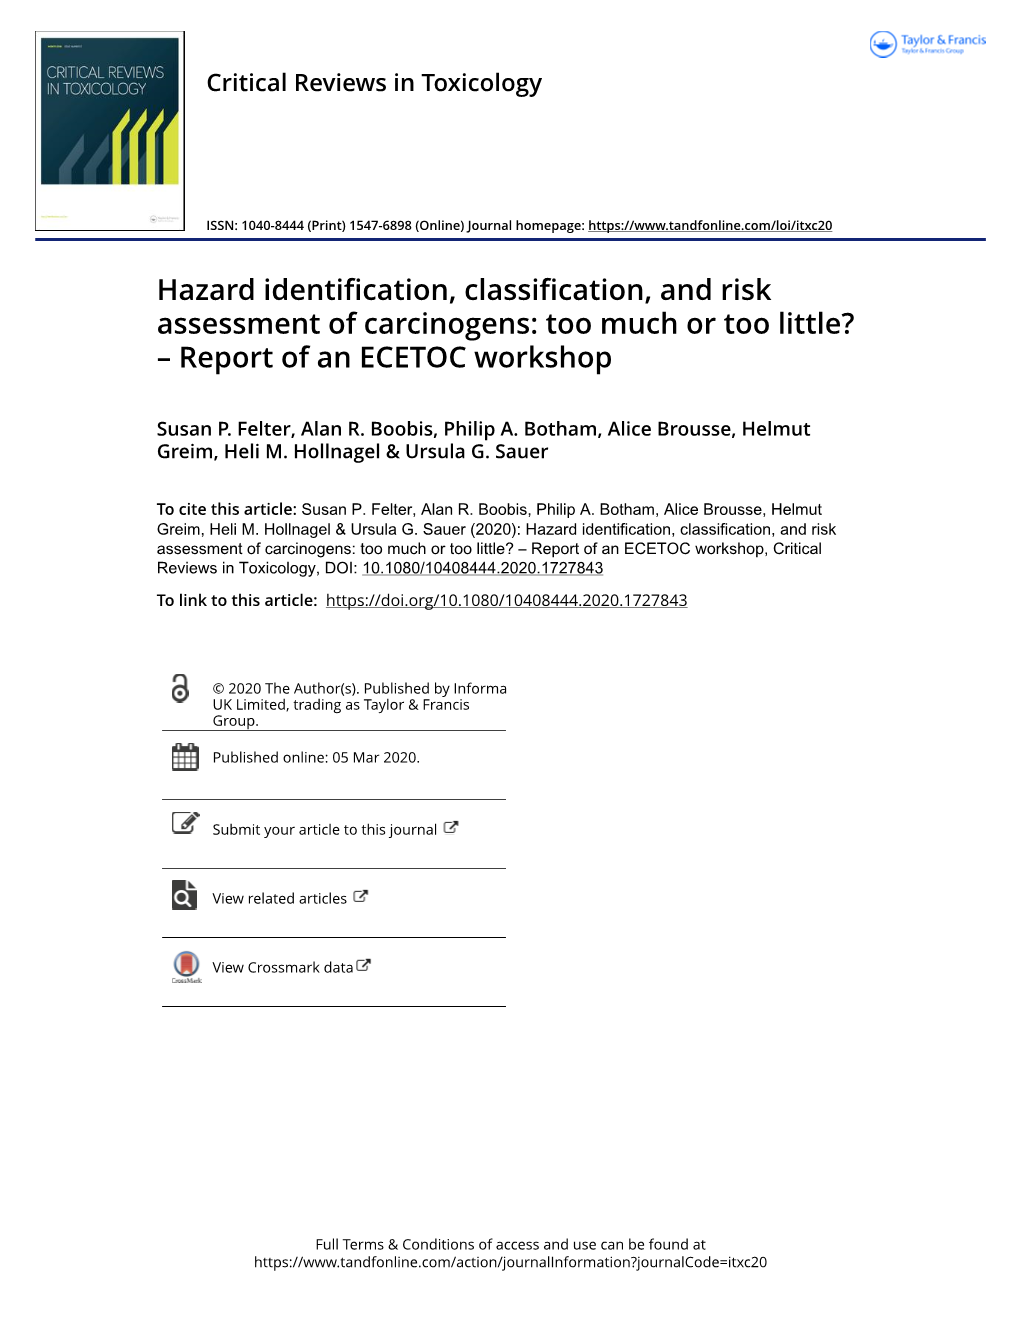 Hazard Identification, Classification, and Risk Assessment of Carcinogens: Too Much Or Too Little? – Report of an ECETOC Workshop